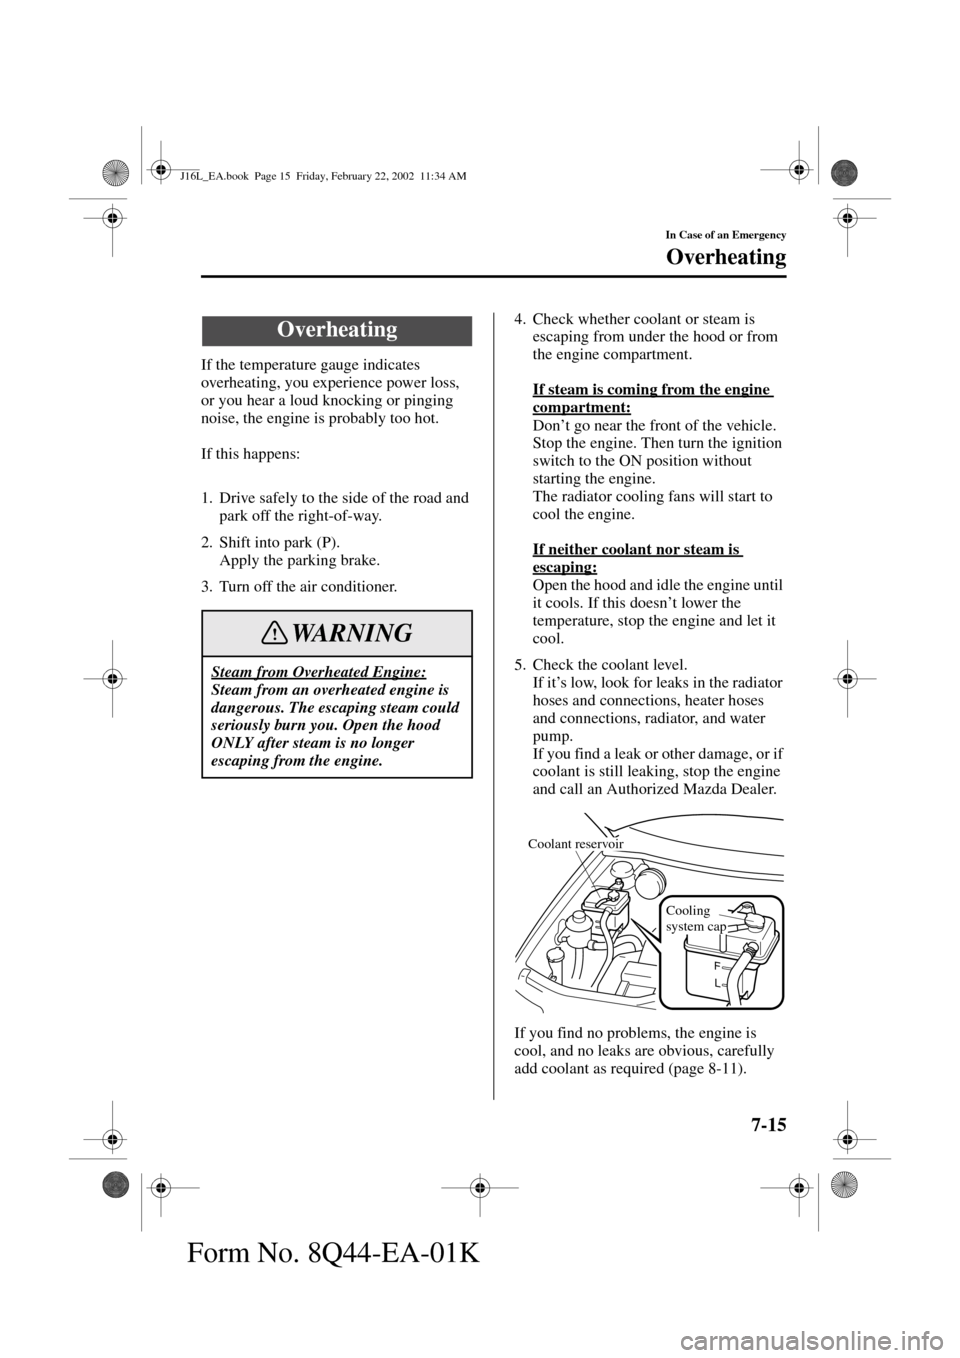 MAZDA MODEL MPV 2002  Owners Manual (in English) 7-15
In Case of an Emergency
Form No. 8Q44-EA-01K
Overheating
If the temperature gauge indicates 
overheating, you experience power loss, 
or you hear a loud knocking or pinging 
noise, the engine is 